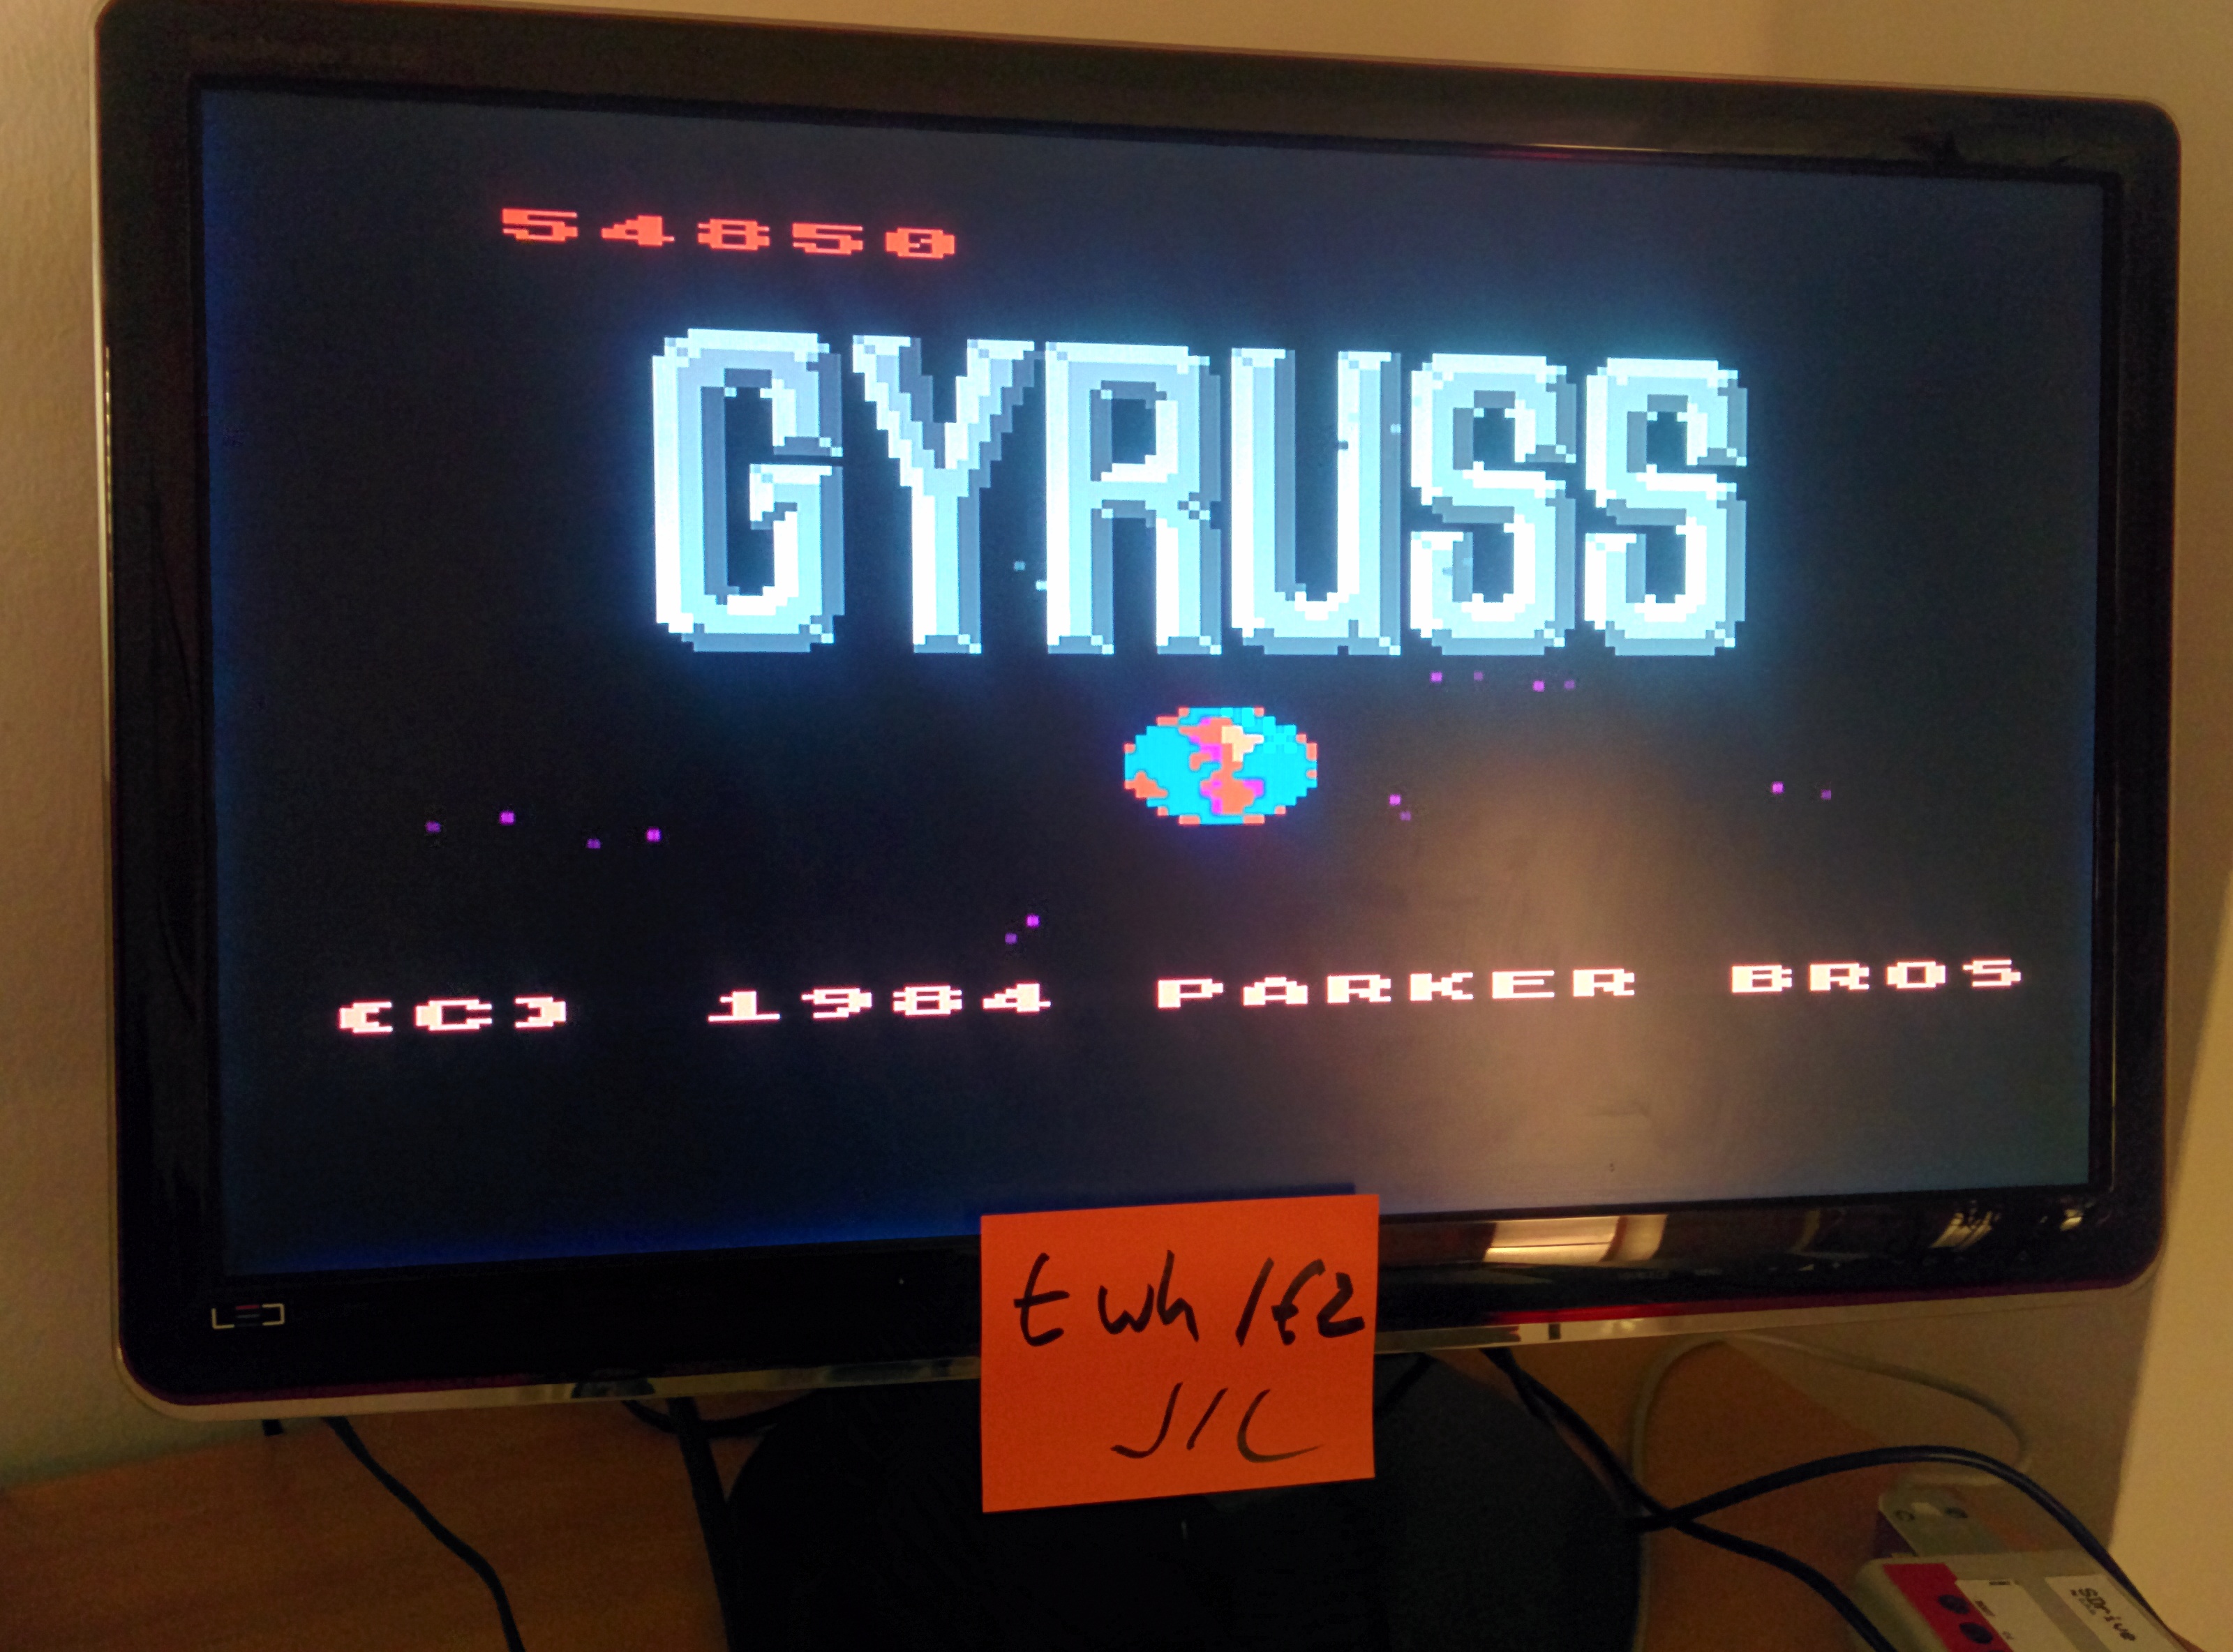 Gyruss 54,850 points